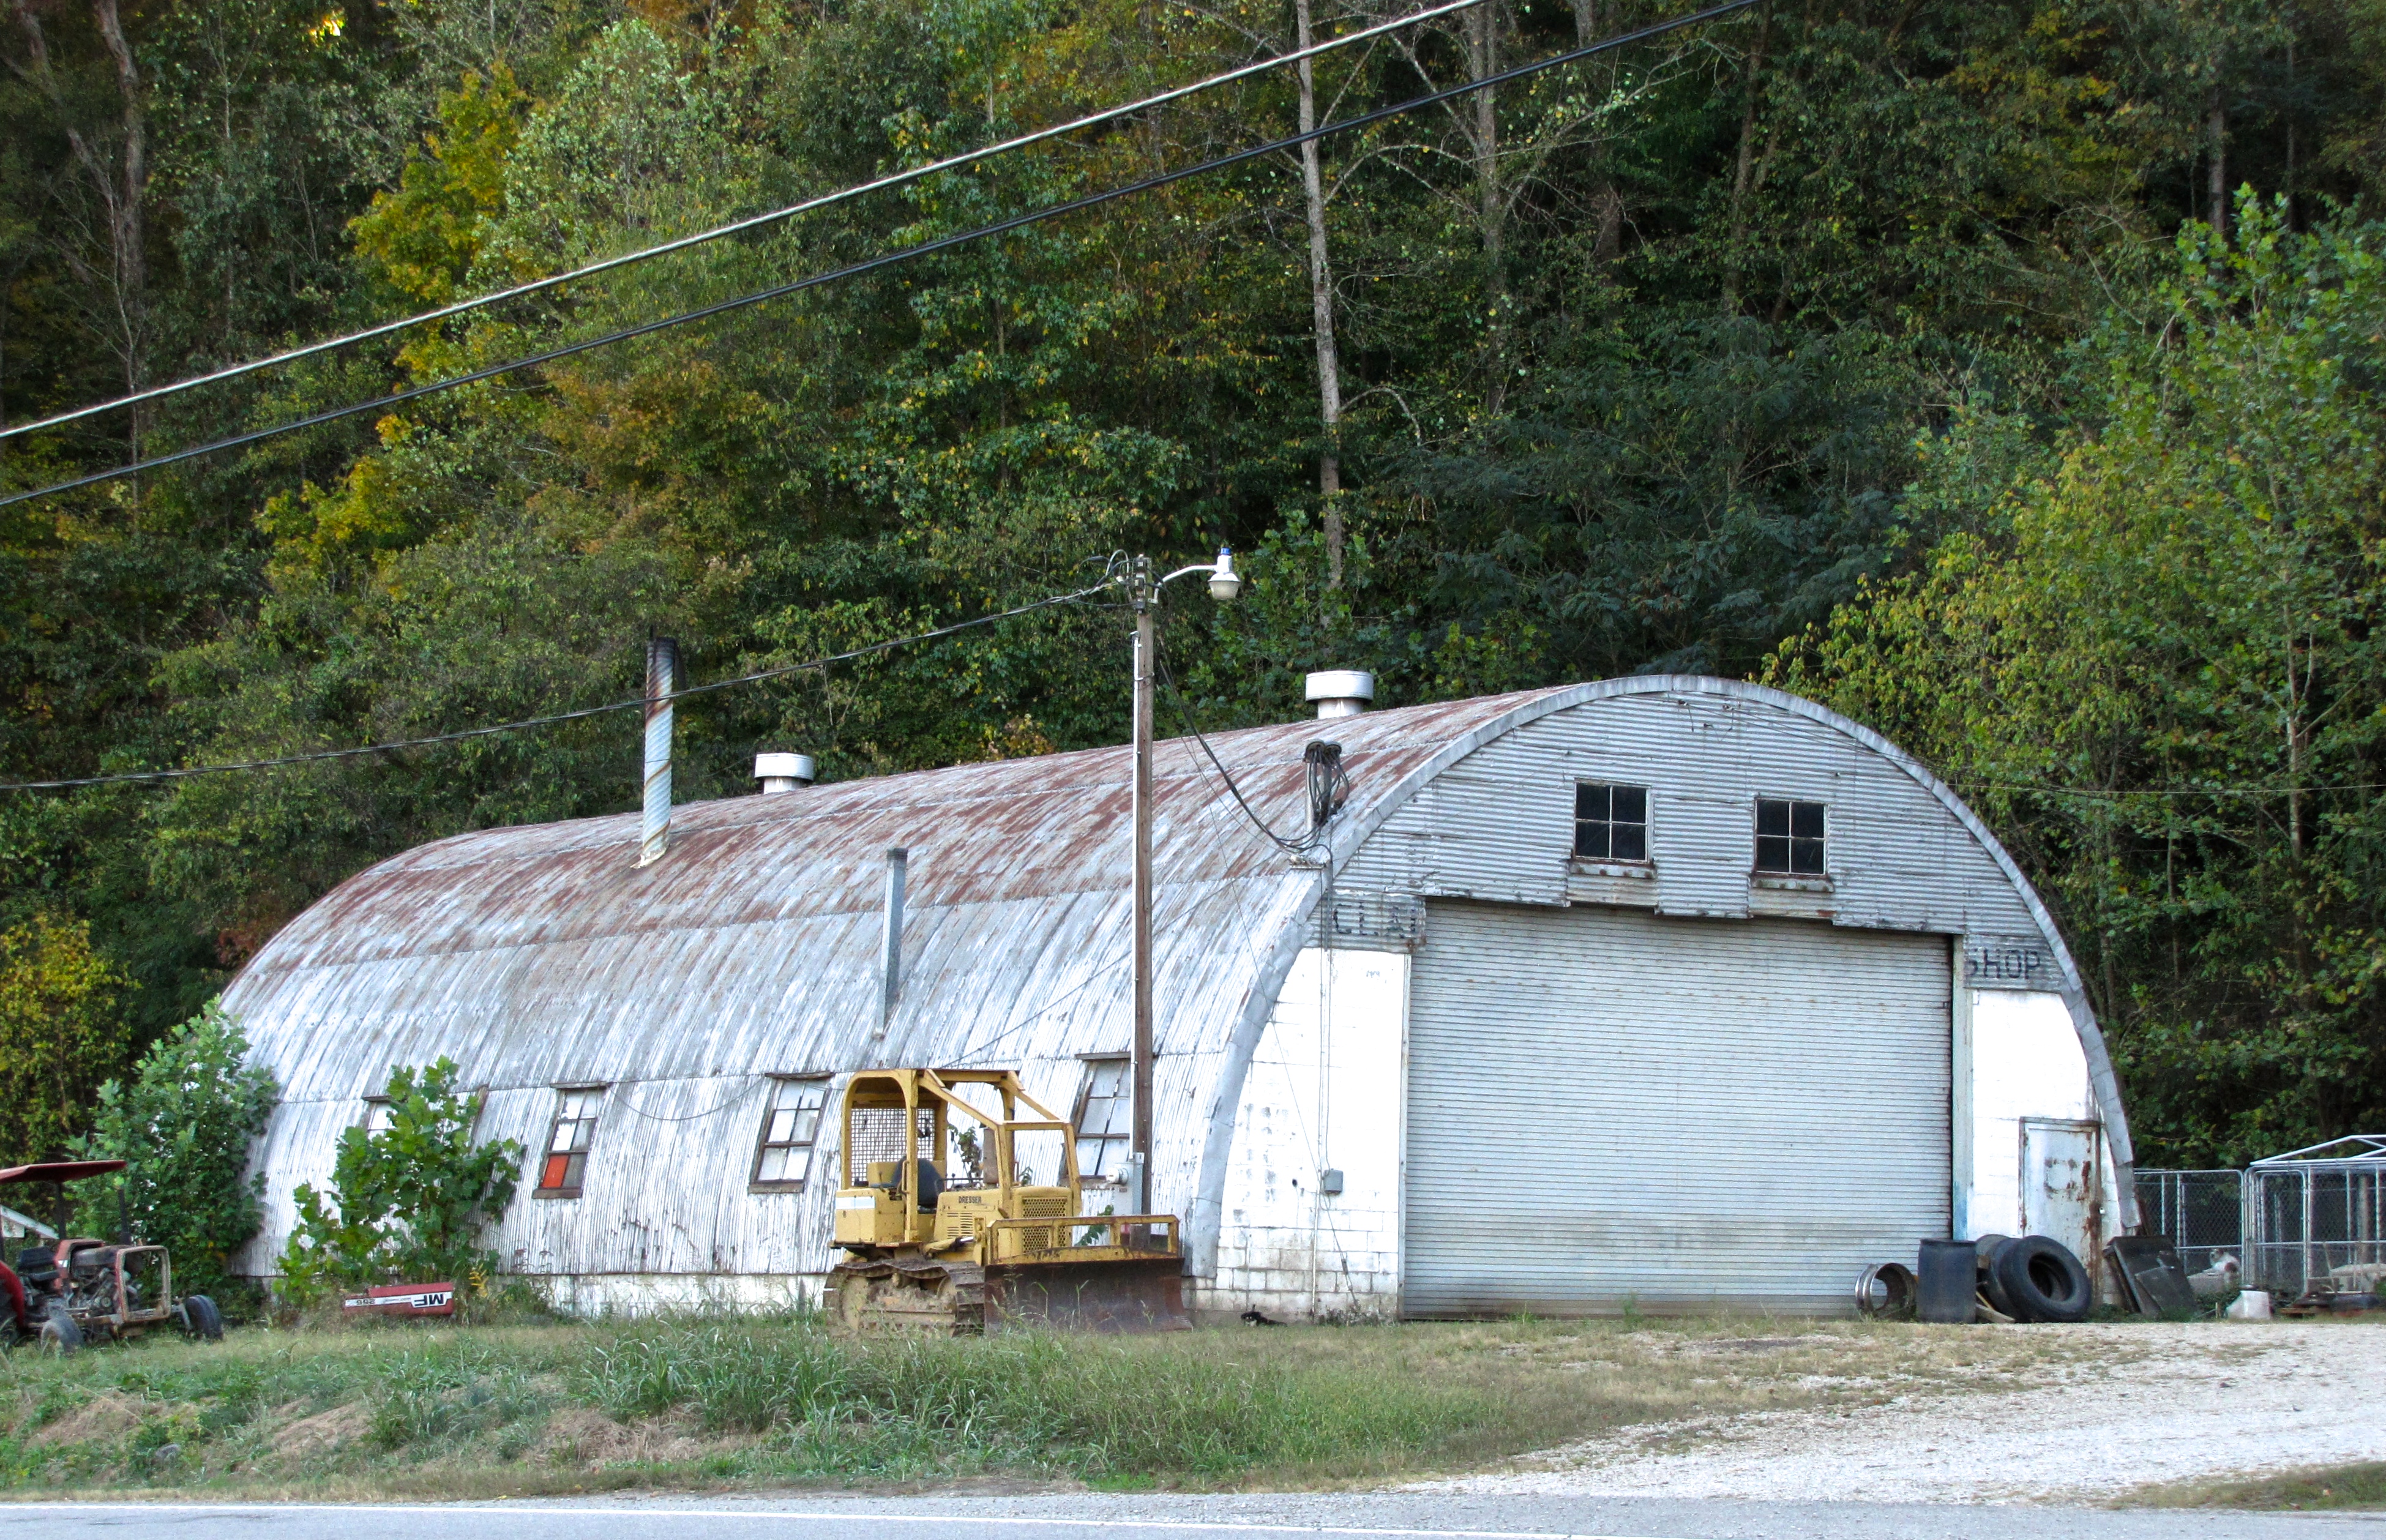 quonset hut in Prospect, CT